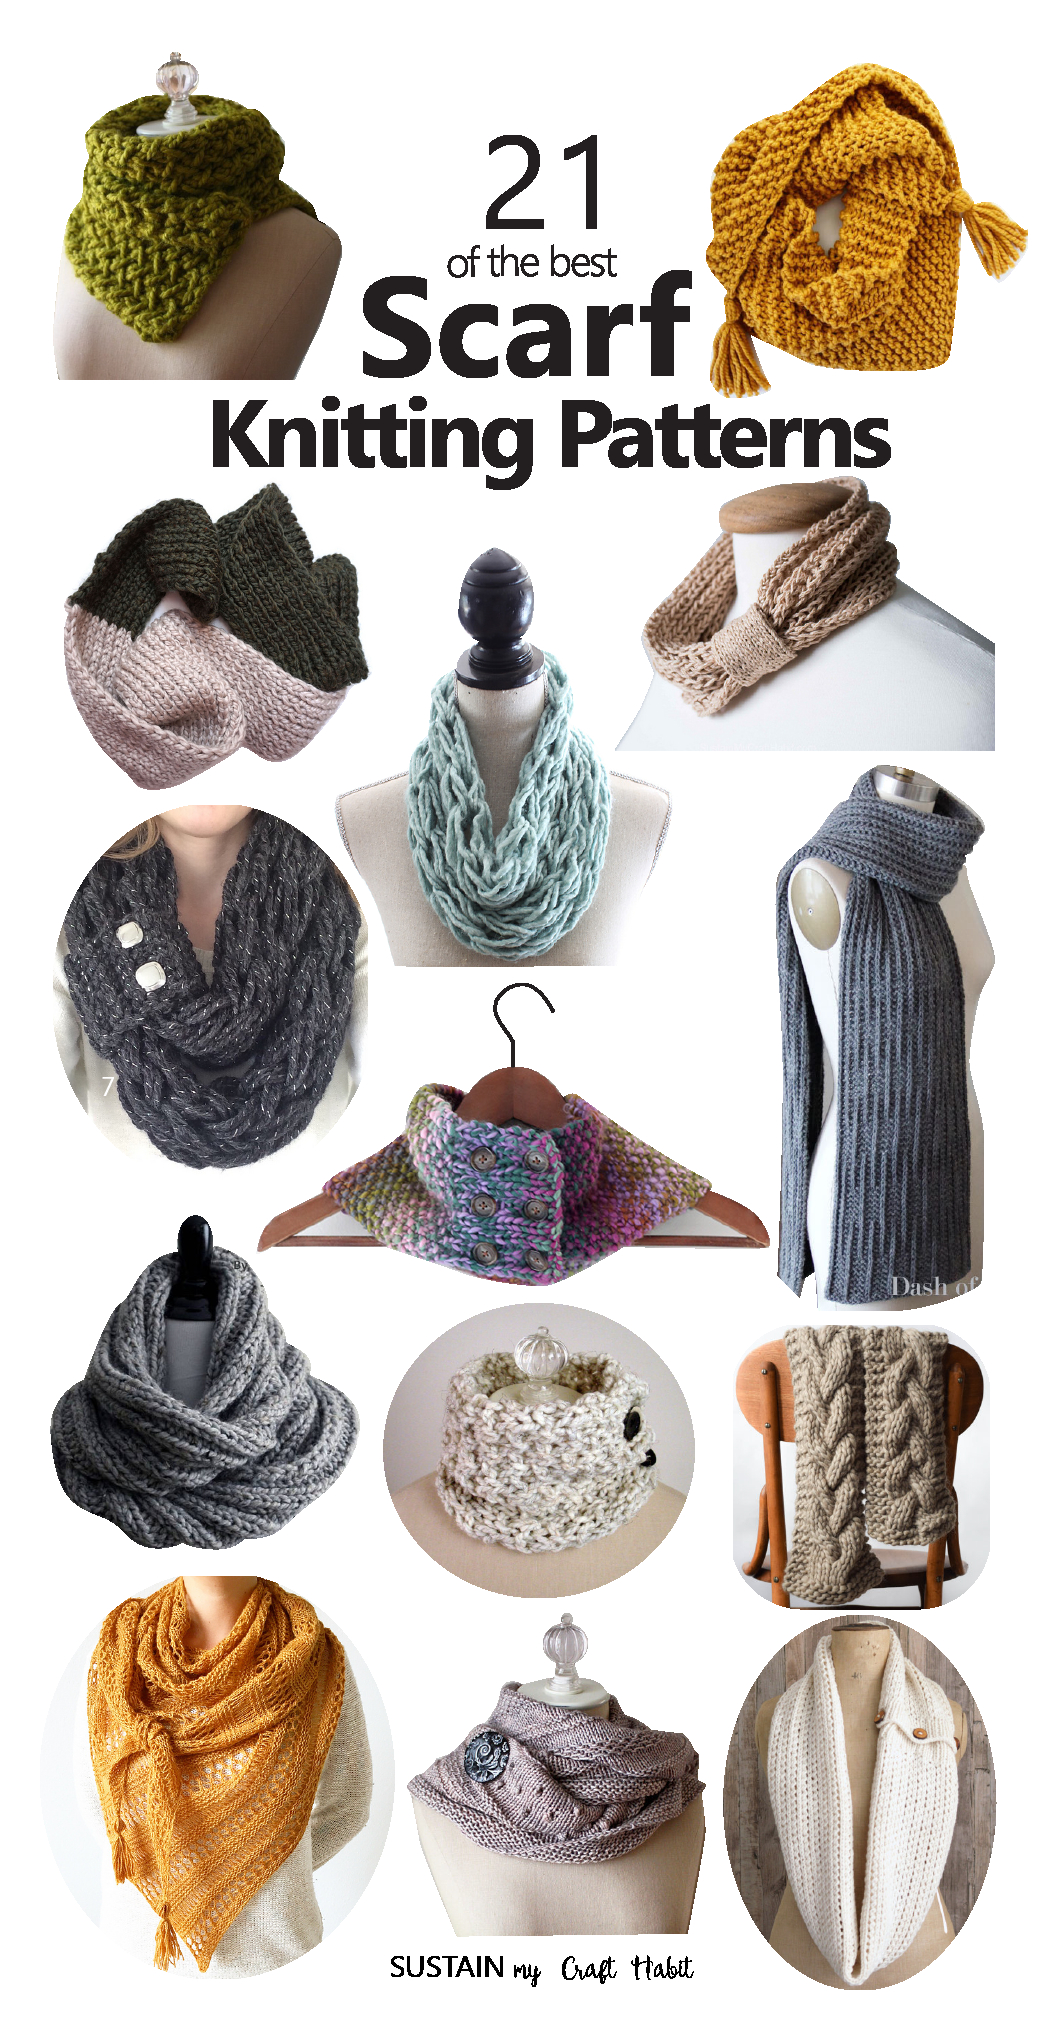 Patterns For Knitting A Scarf 21 Of The Best Scarf Knitting Patterns Sustain My Craft Habit